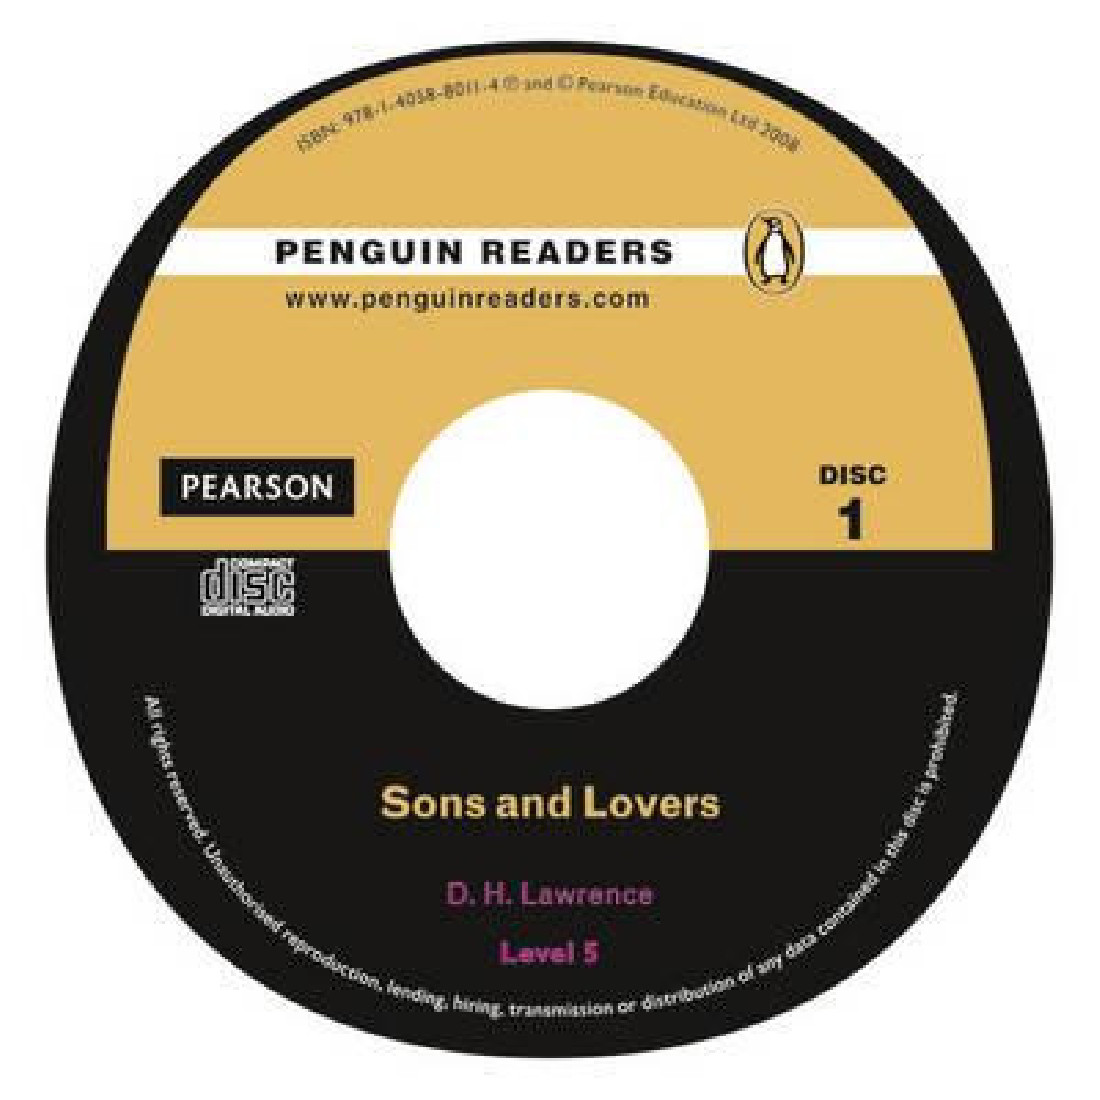 PR 5: SONS AND LOVERS (+ CD)